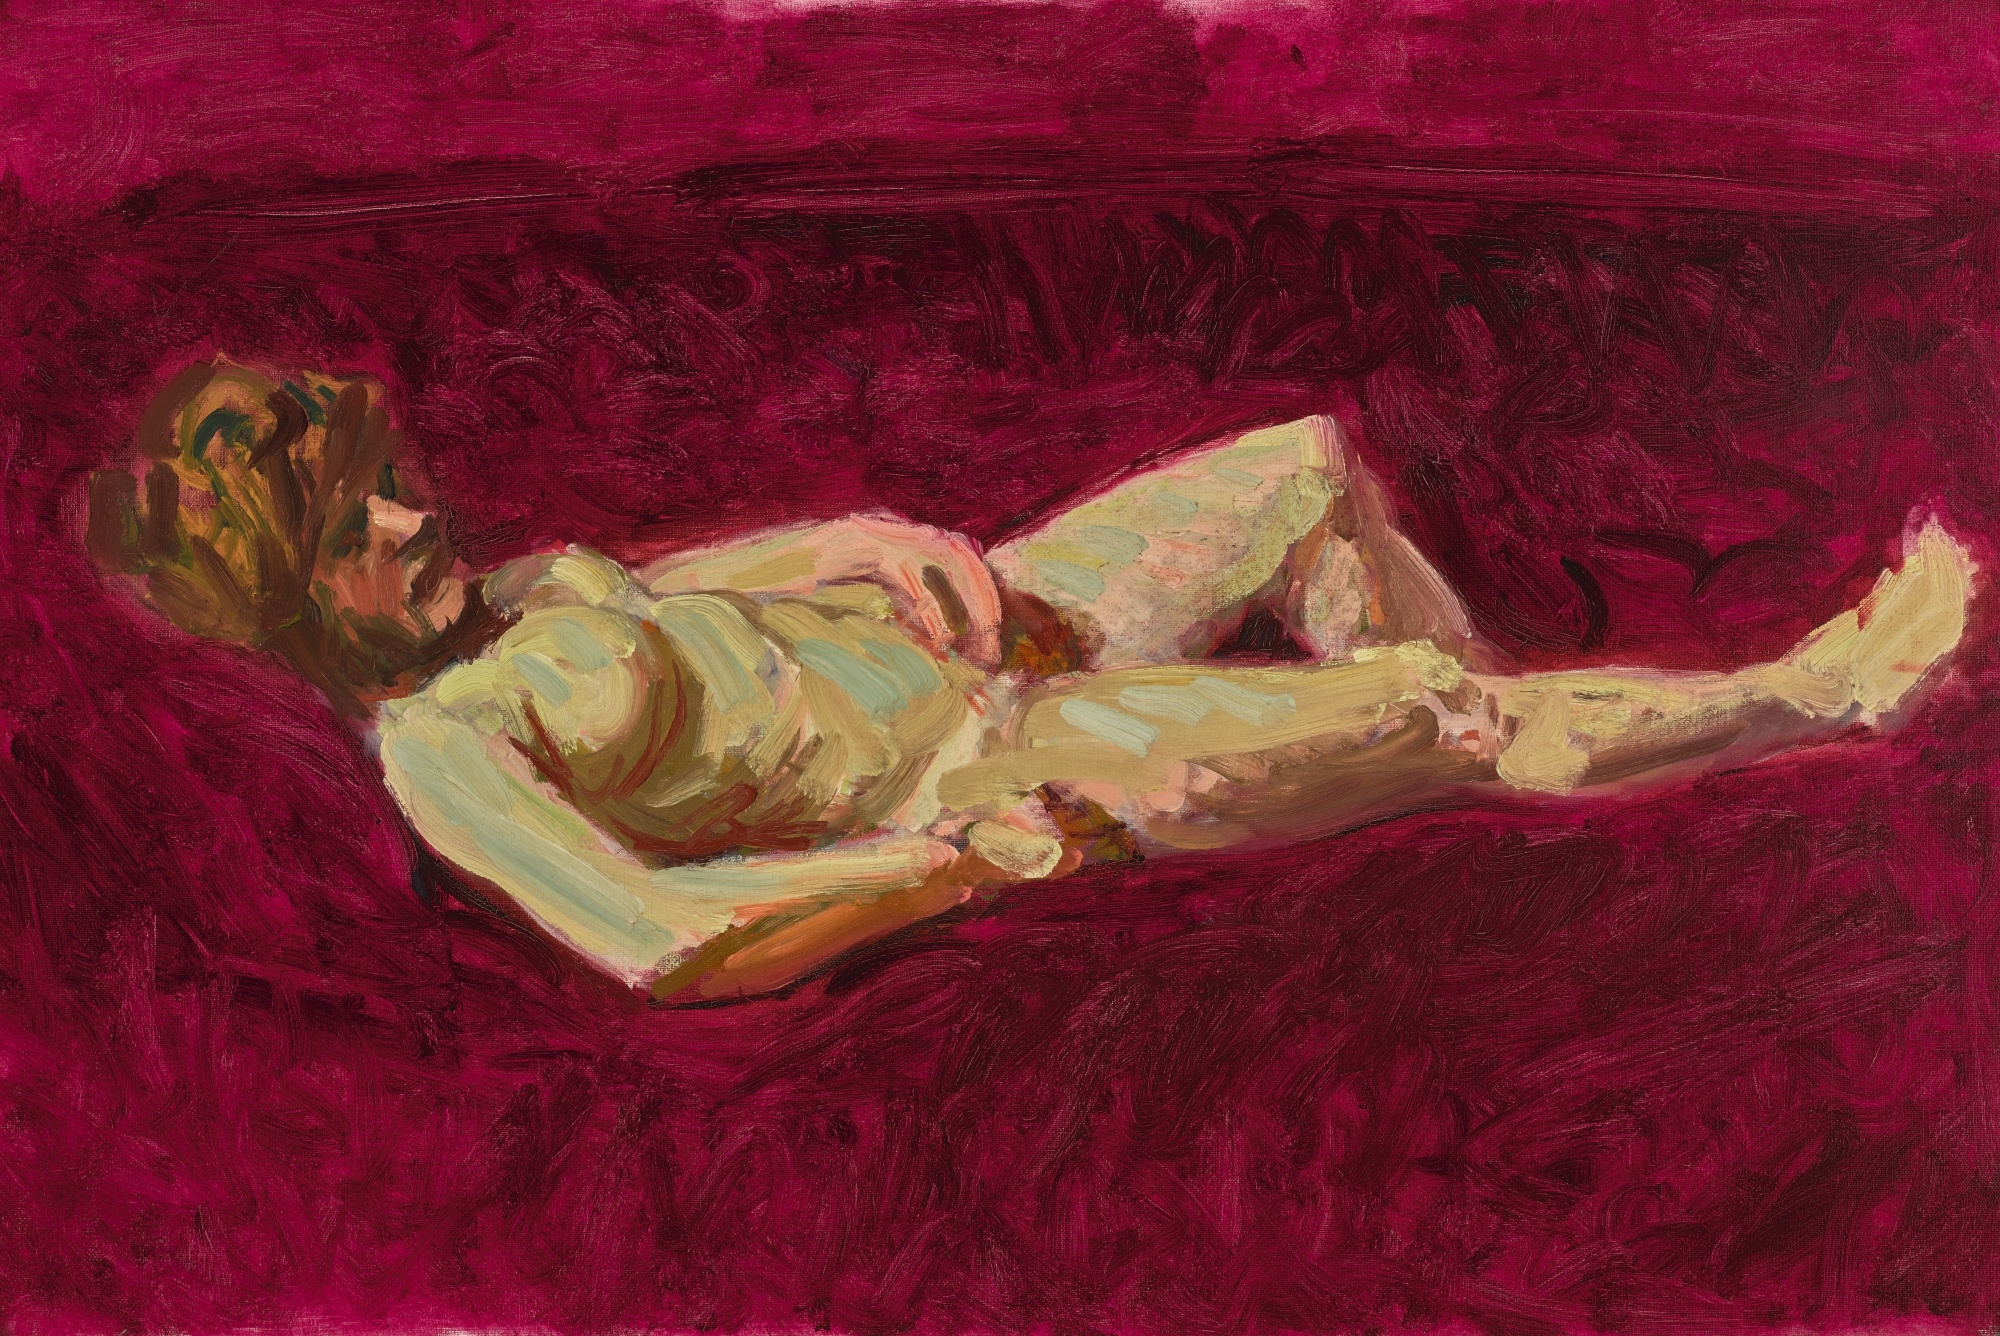 Artwork by Roderic O'Conor, RECLINING NUDE, Made of oil on canvas.